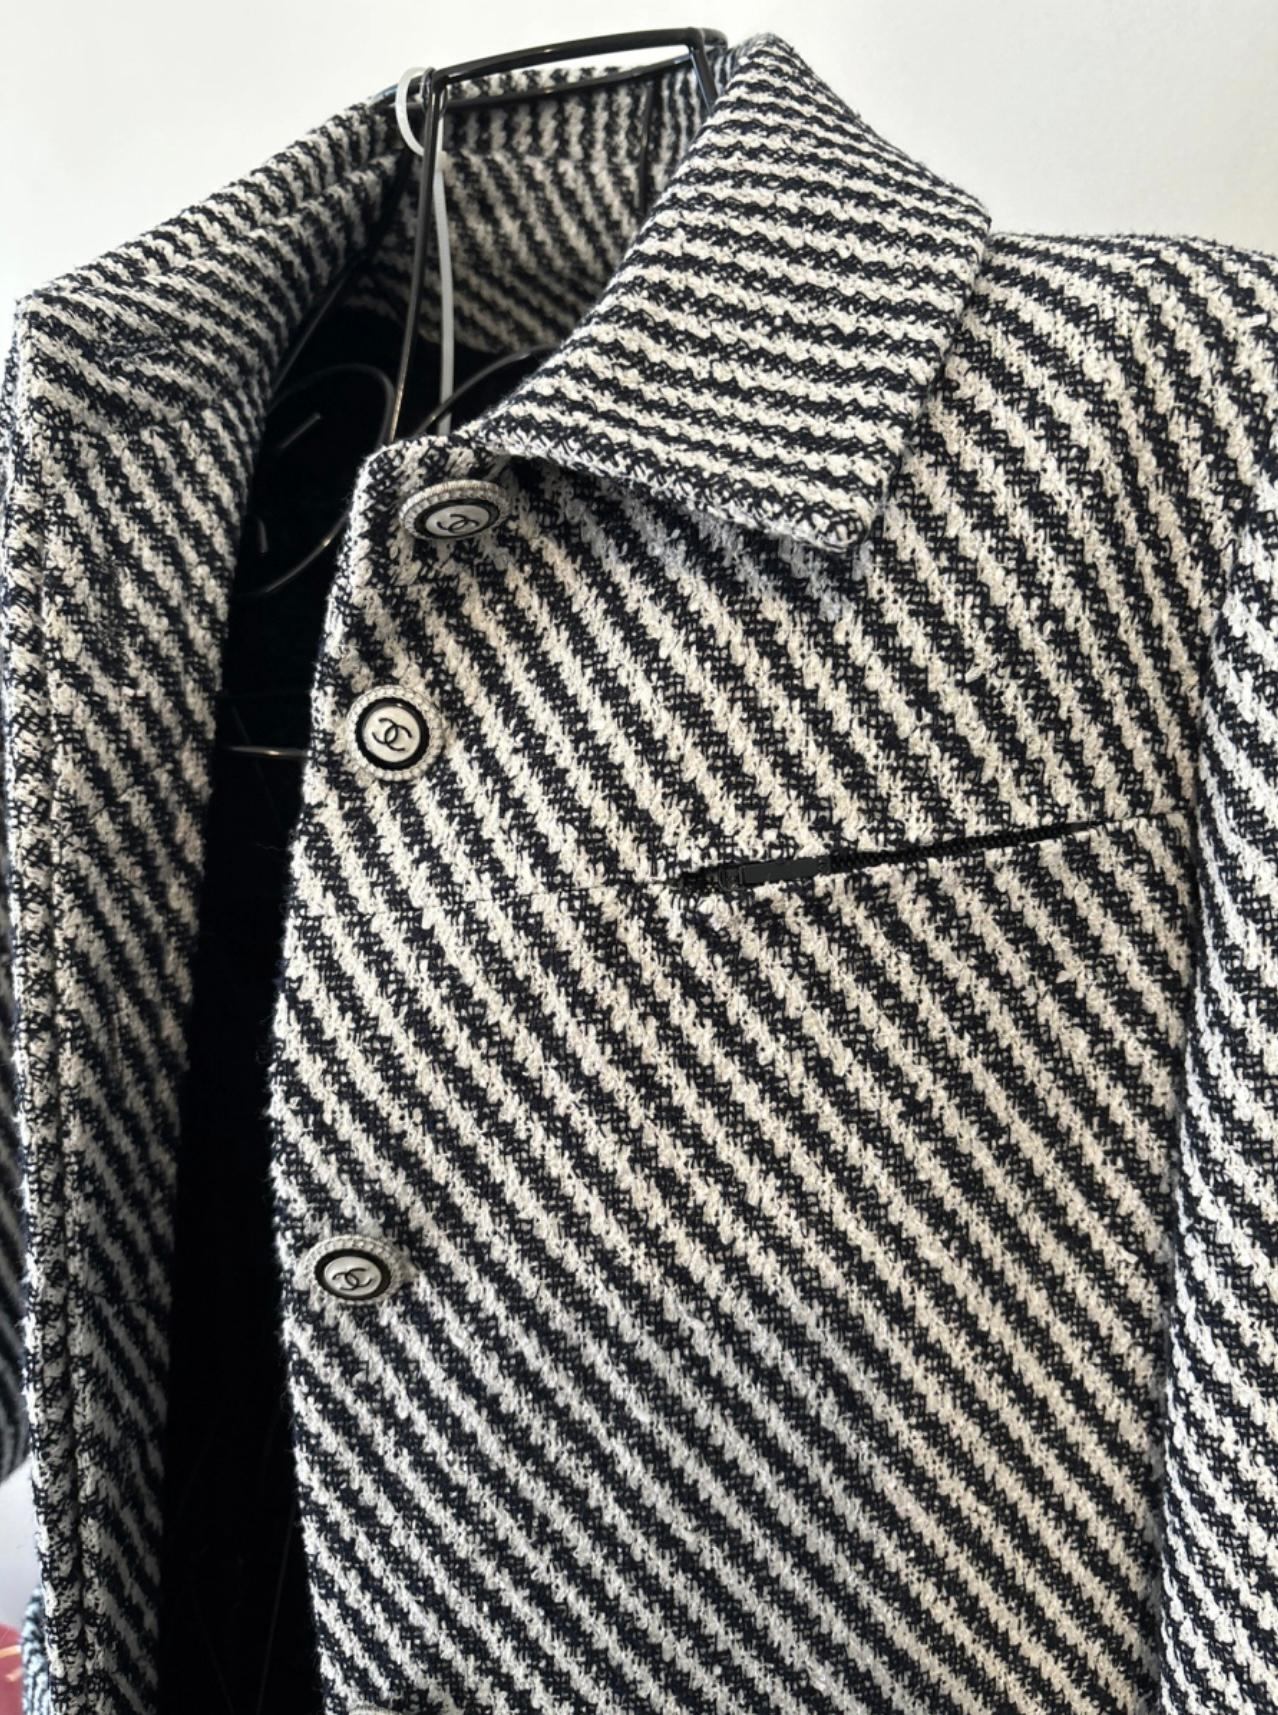 Chanel CC Buttons Tweed Jacket / Coat In Excellent Condition For Sale In Dubai, AE